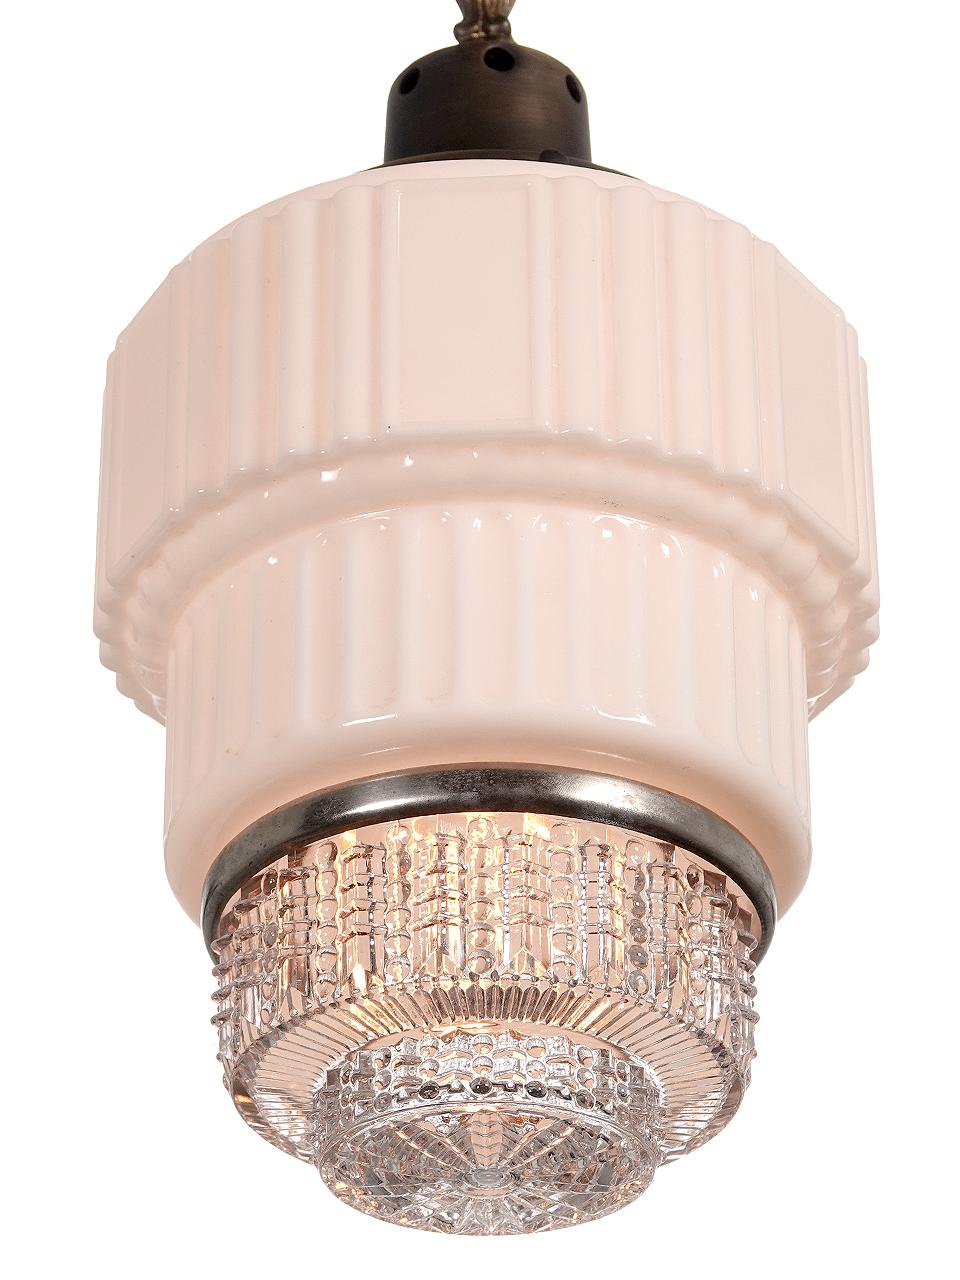 We only have one example of this beautiful Deco Skyscraper pendent. The top had a nice ornate crown and the bottom is very deco in style. We like distinctive look of the two piece milk and clear of glass shade. We will finish the lamp to your drop